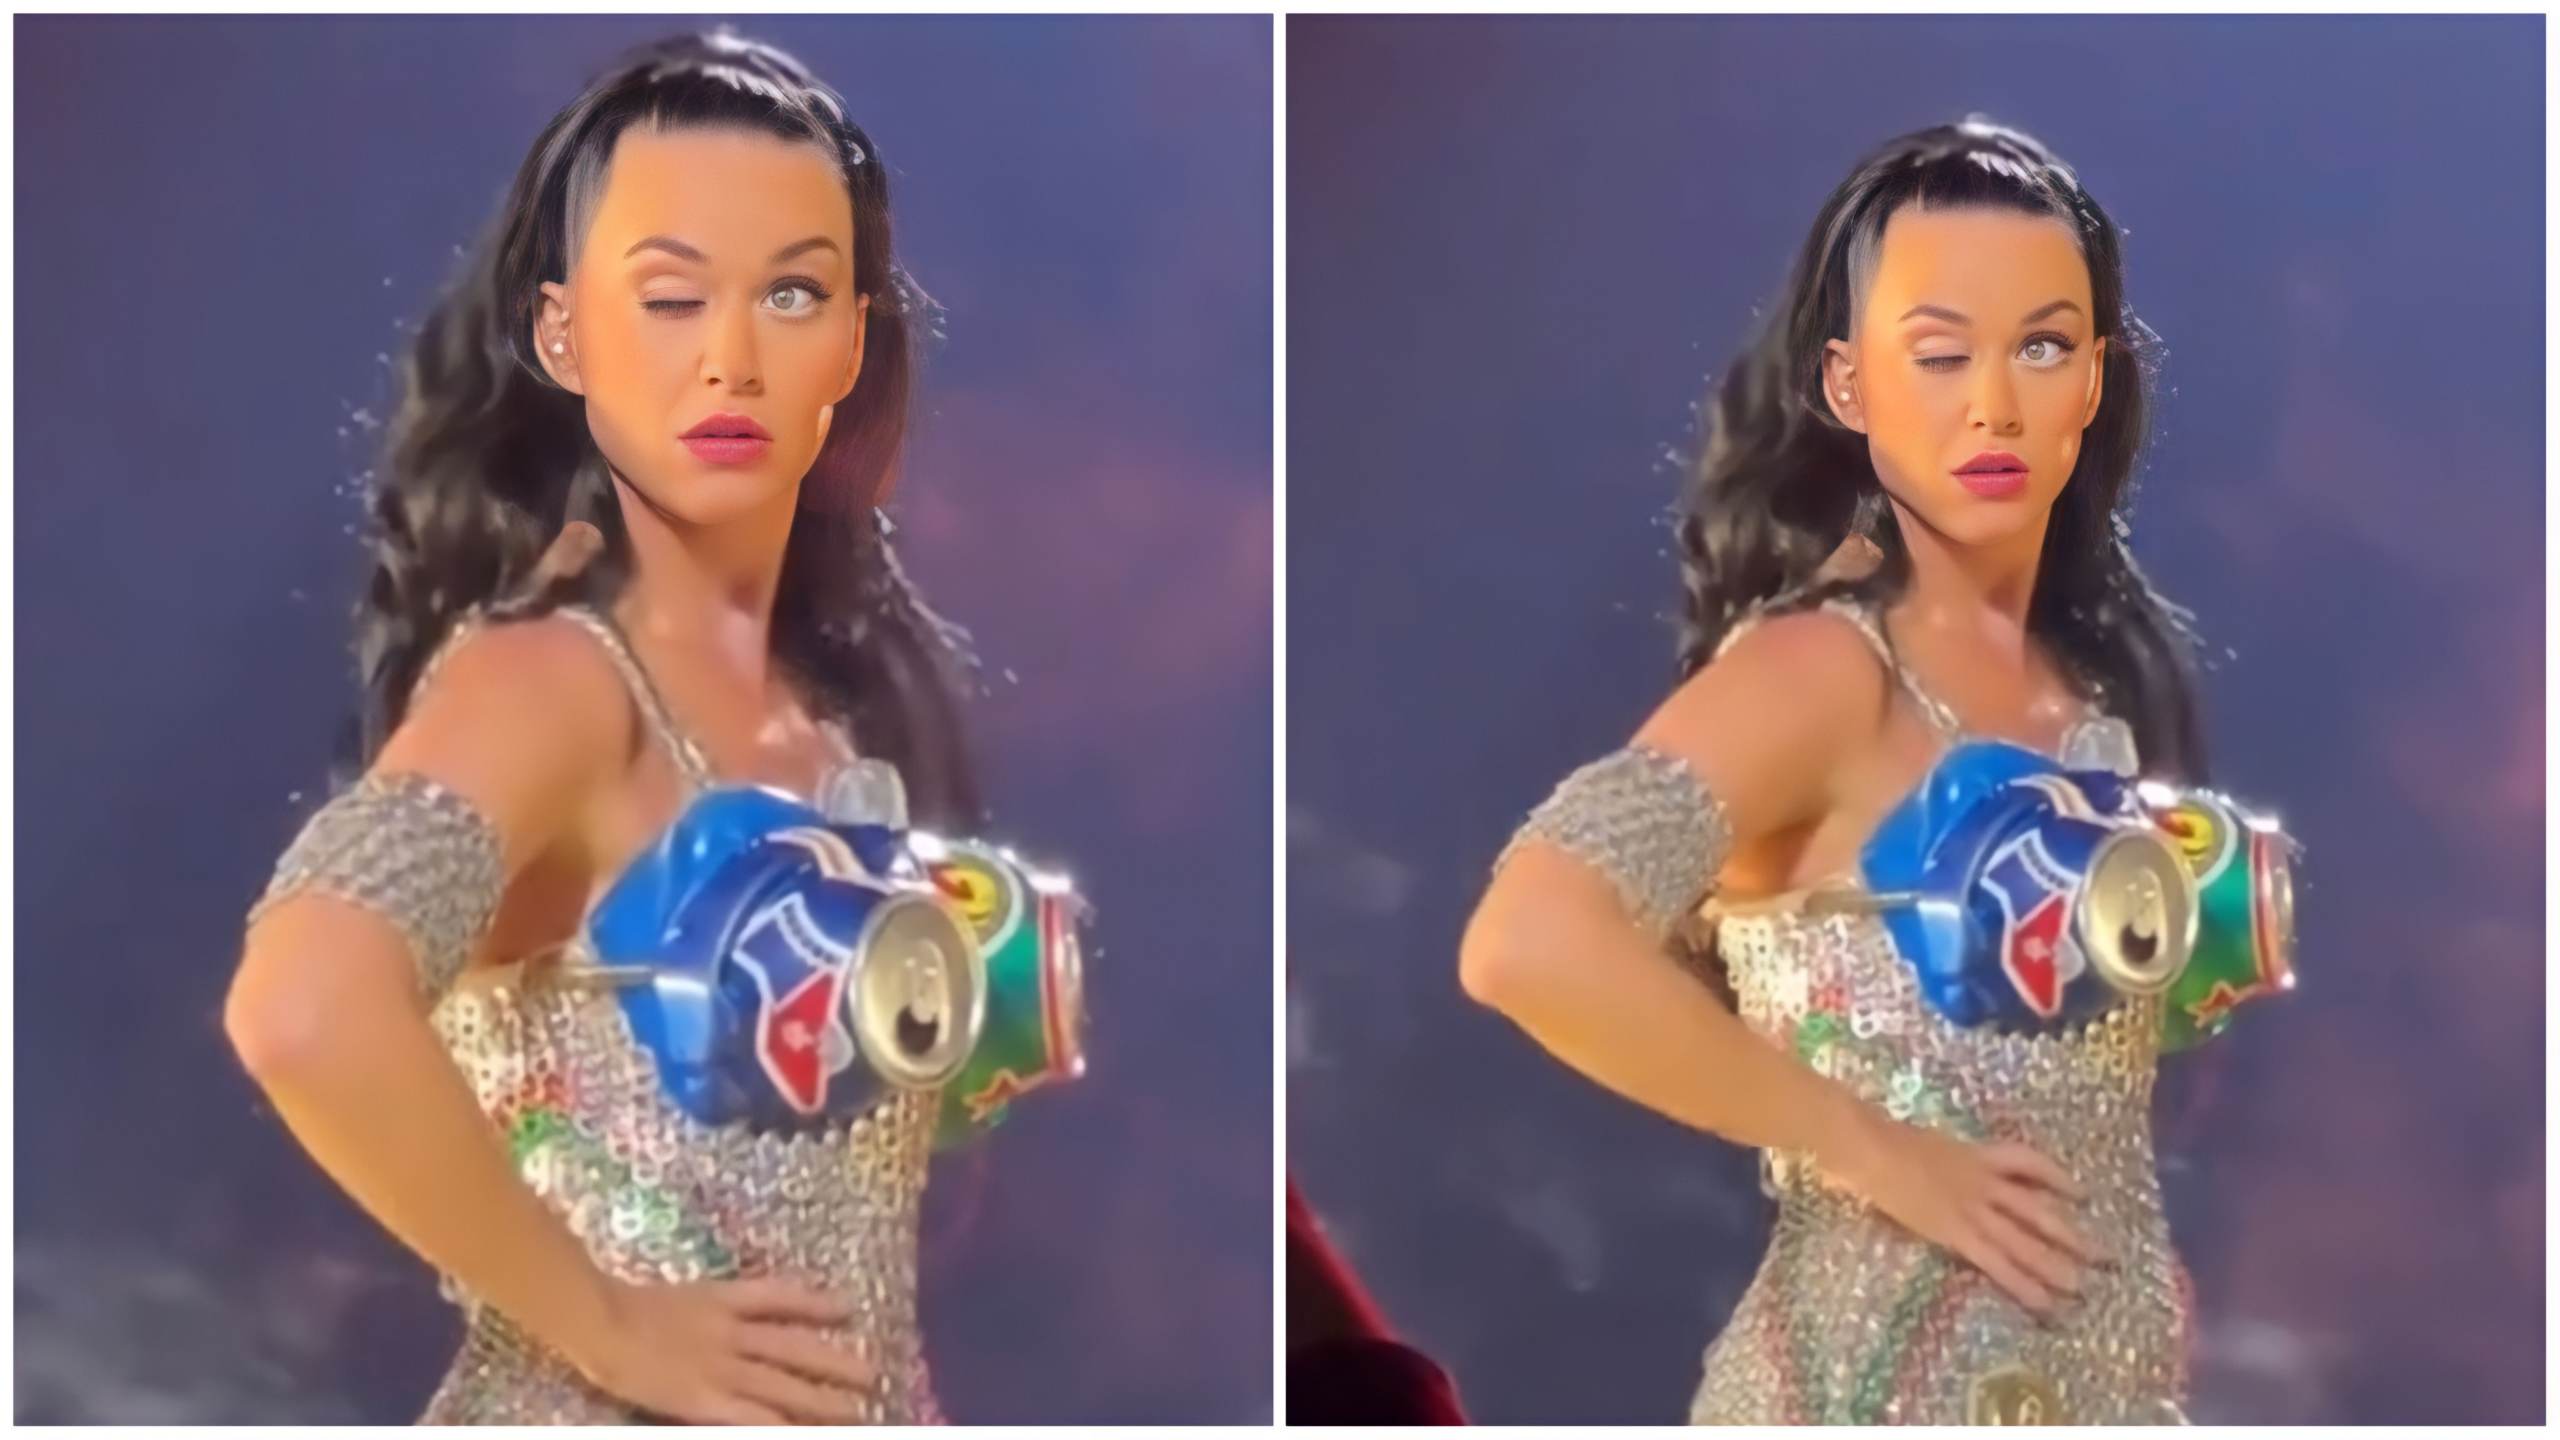 Real or Fake? Did Katy Perry Suffer Weird Facial Spasm During Concert (VIDEO)